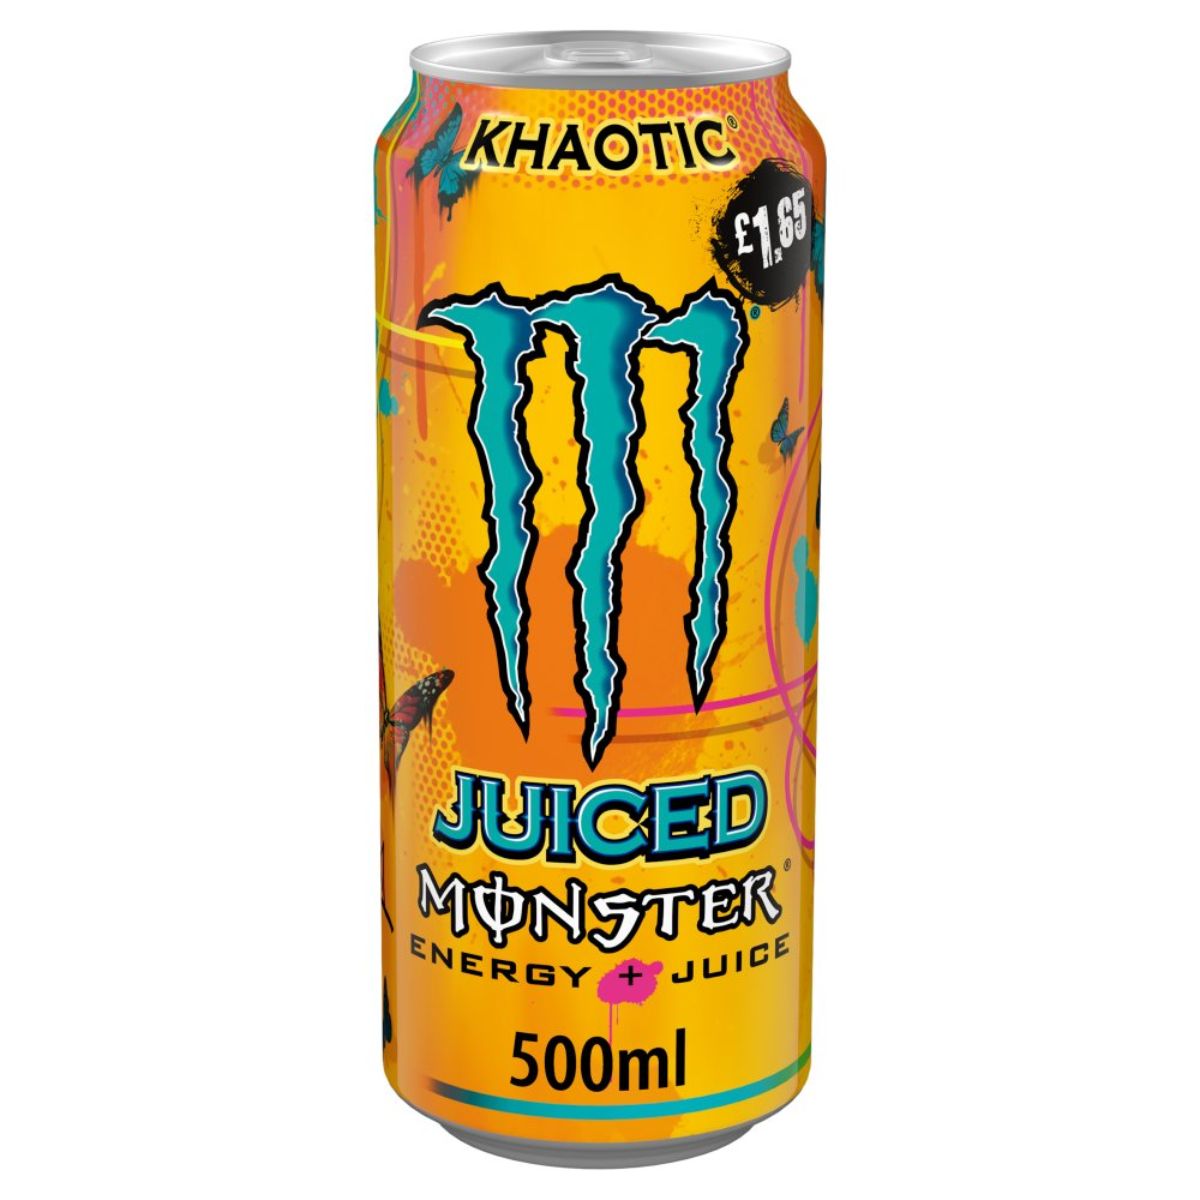 A can of Monster - Energy Drink Khaotic - 500ml.